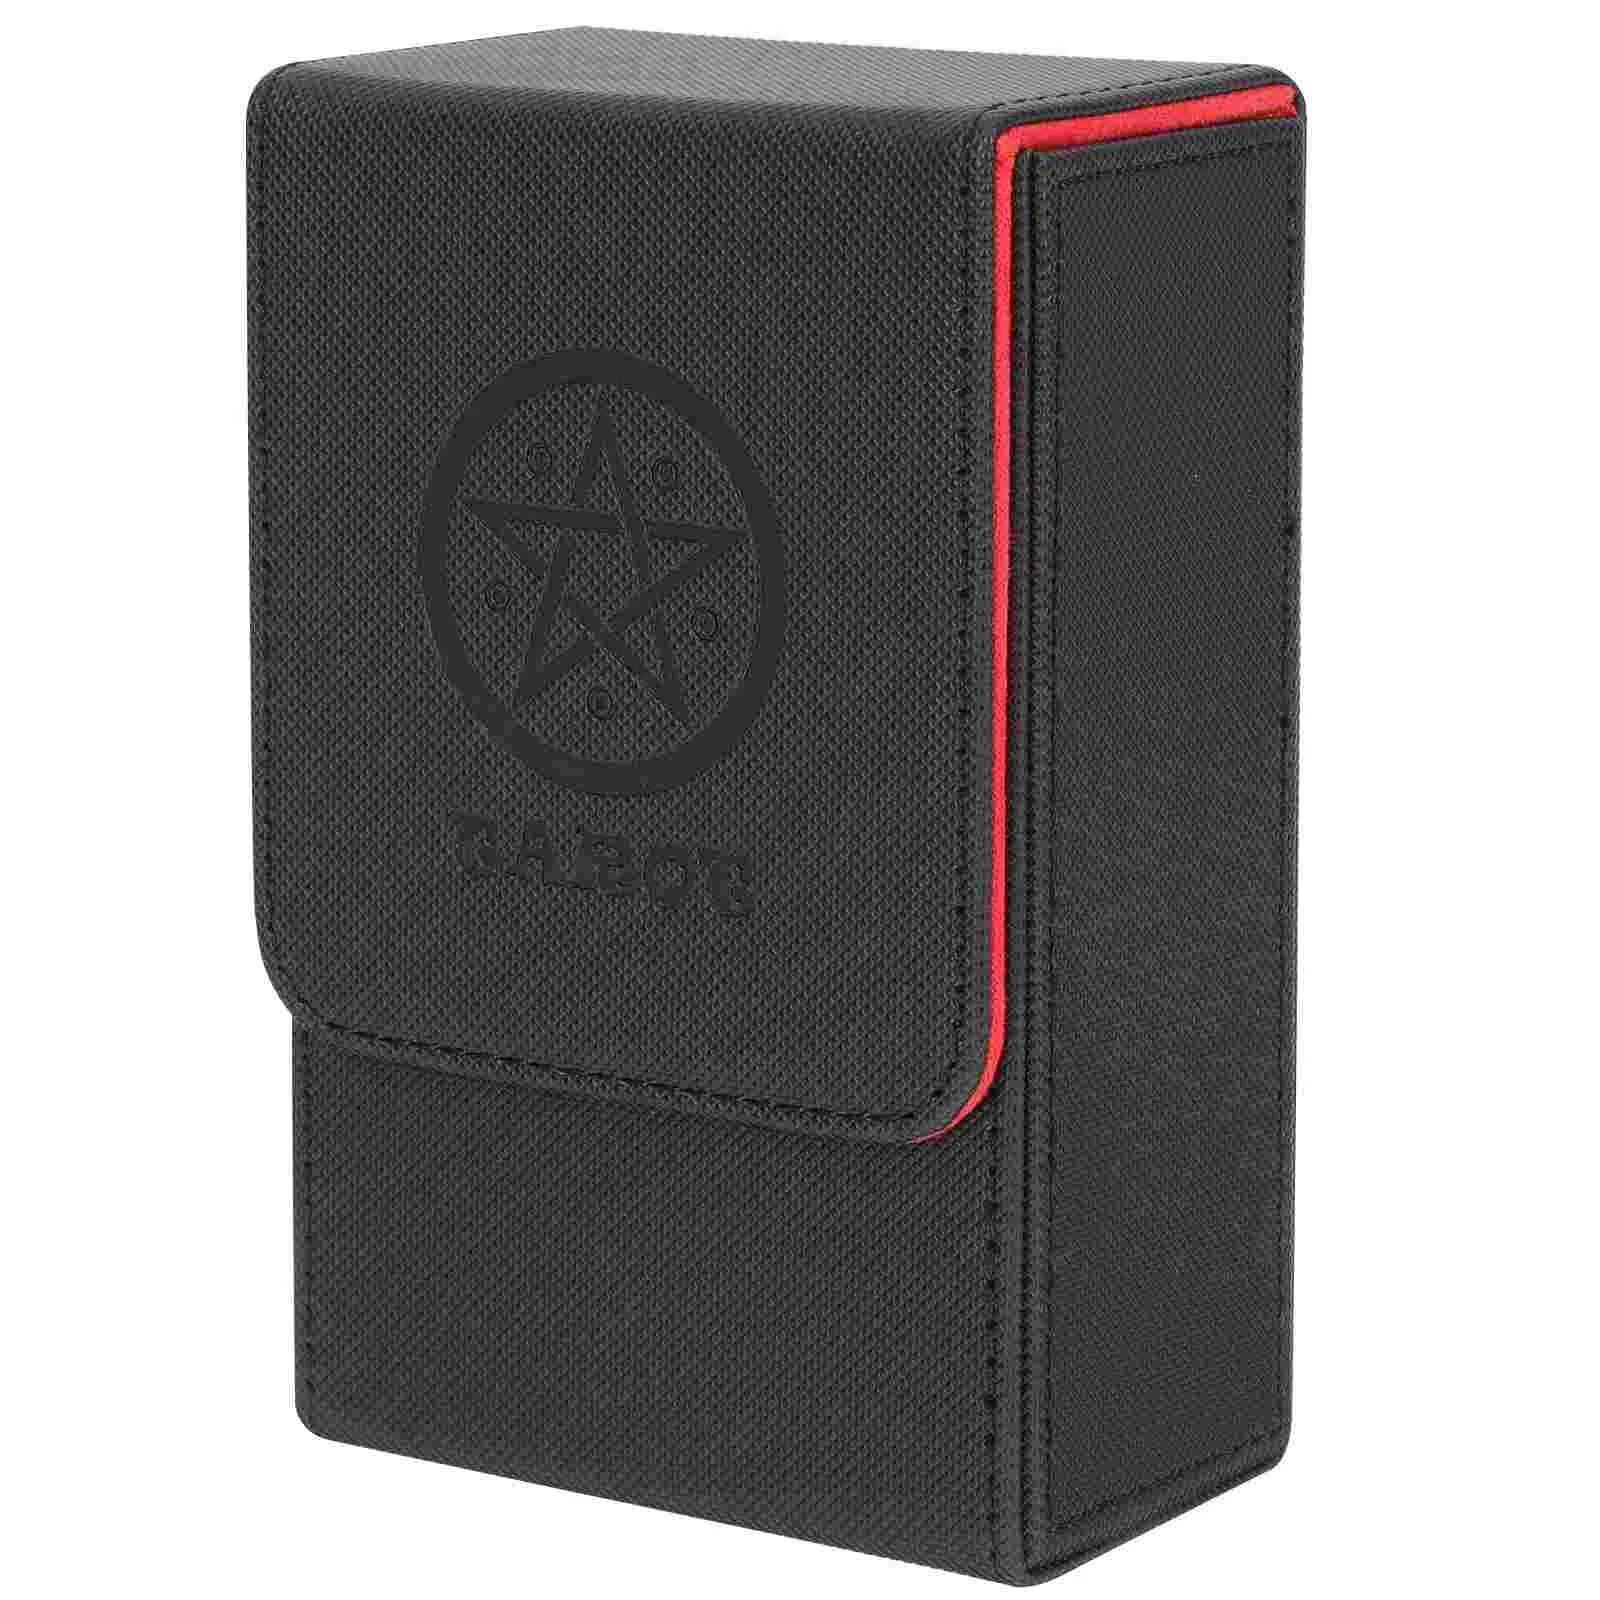 

Tarot Card Box PU Poker Holder Portable Deck Universal Organizer Desk Storage Canister Tank Games Cards Case Wiccan Supplies